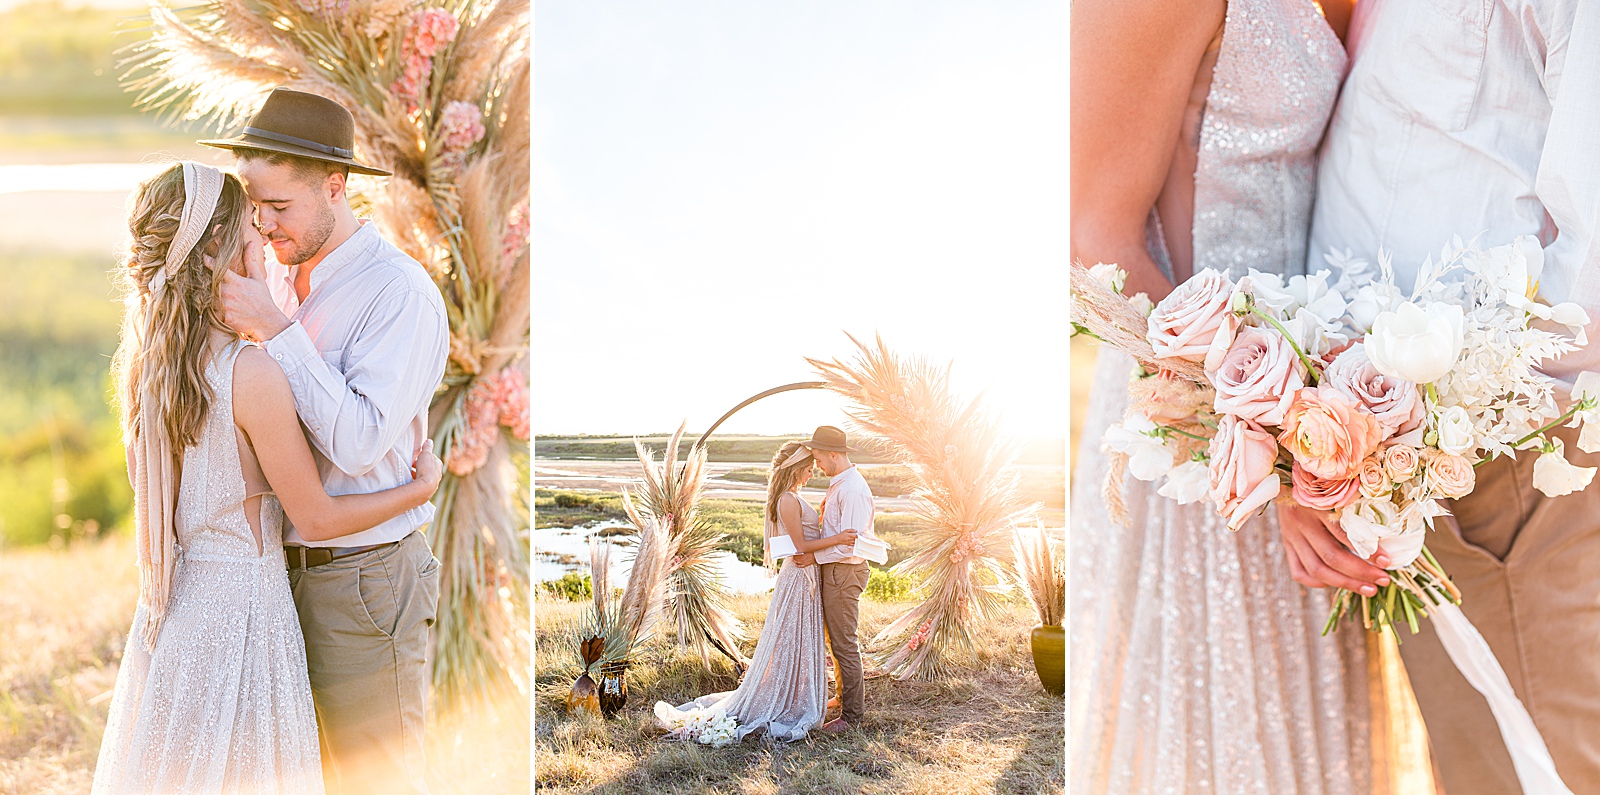 Moroccan Inspired Elopemement Ceremony at Sunset